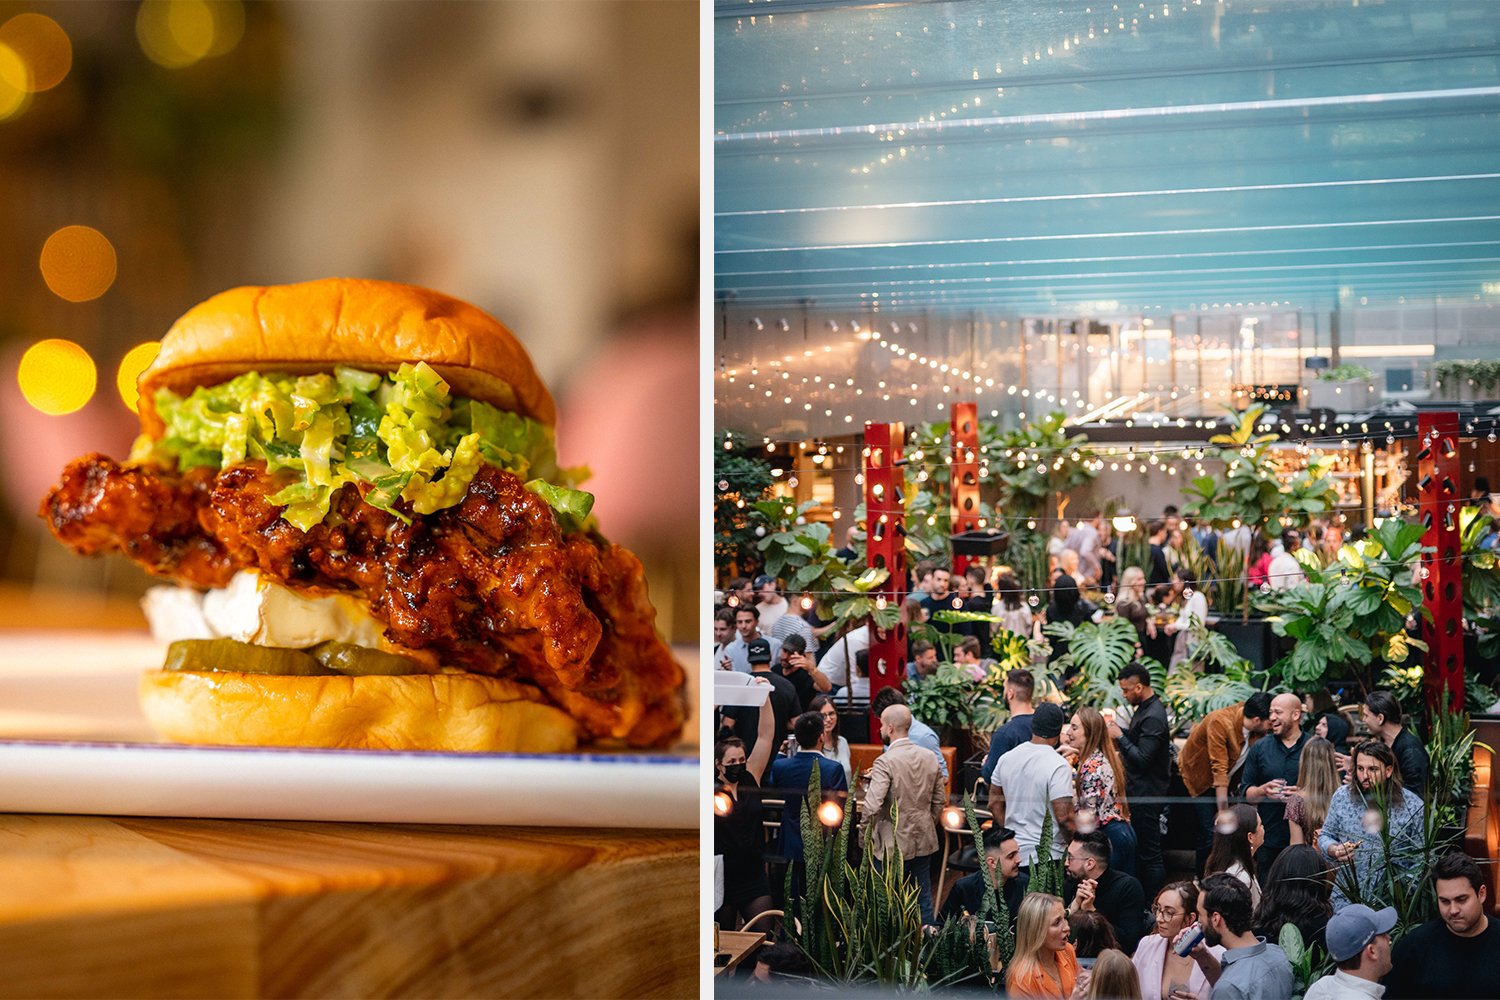 A Korean fried chicken sandwich (left) and the covered Biergarten, both at Montreal's Le Cathcart food hall